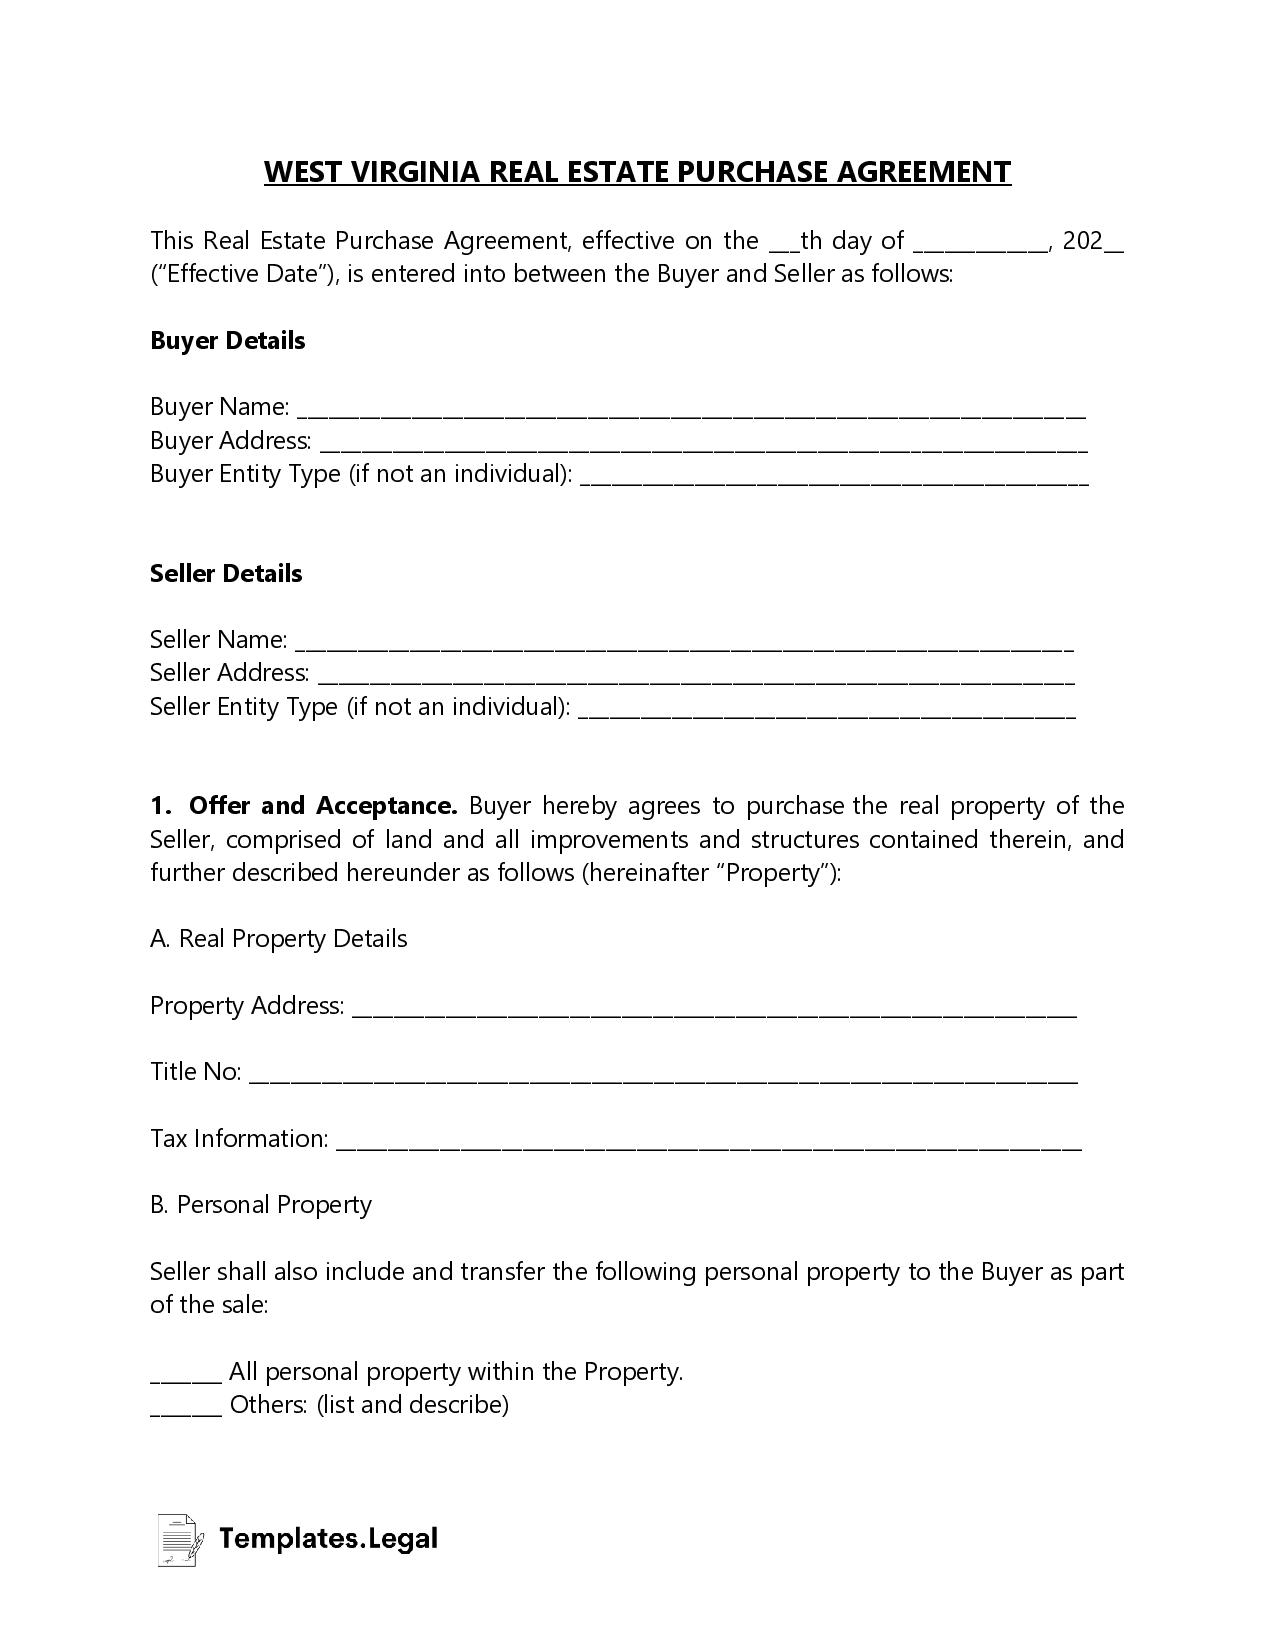 West Virginia Real Estate Purchase Agreement - Templates.Legal